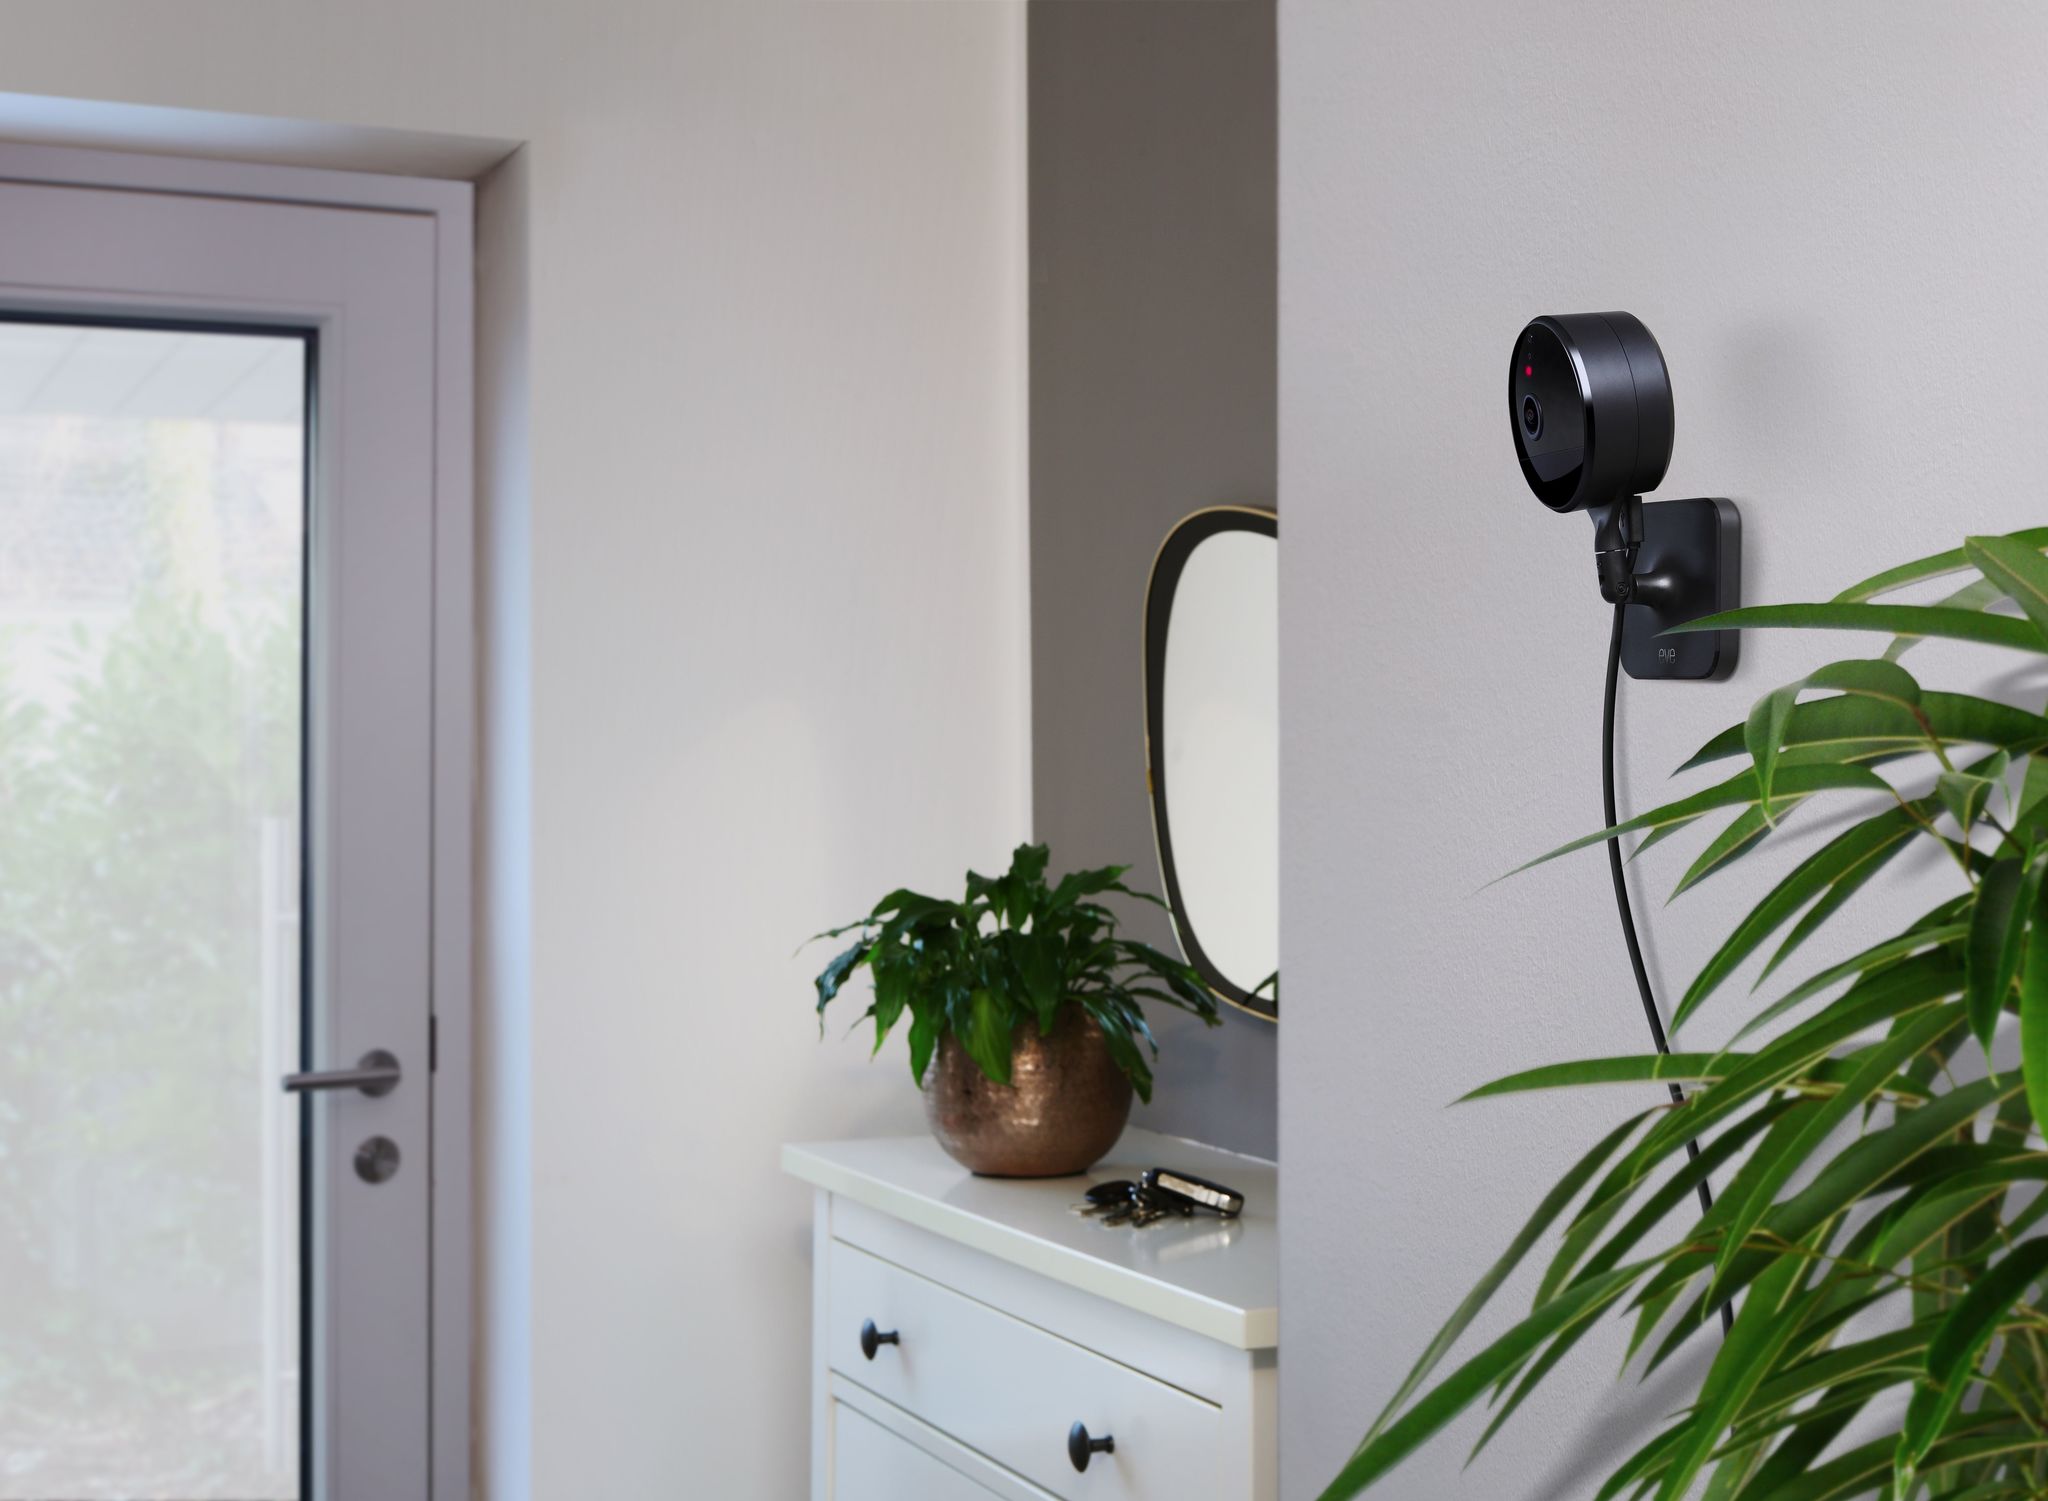 Eve Cam installed on a wall in an indoor setting